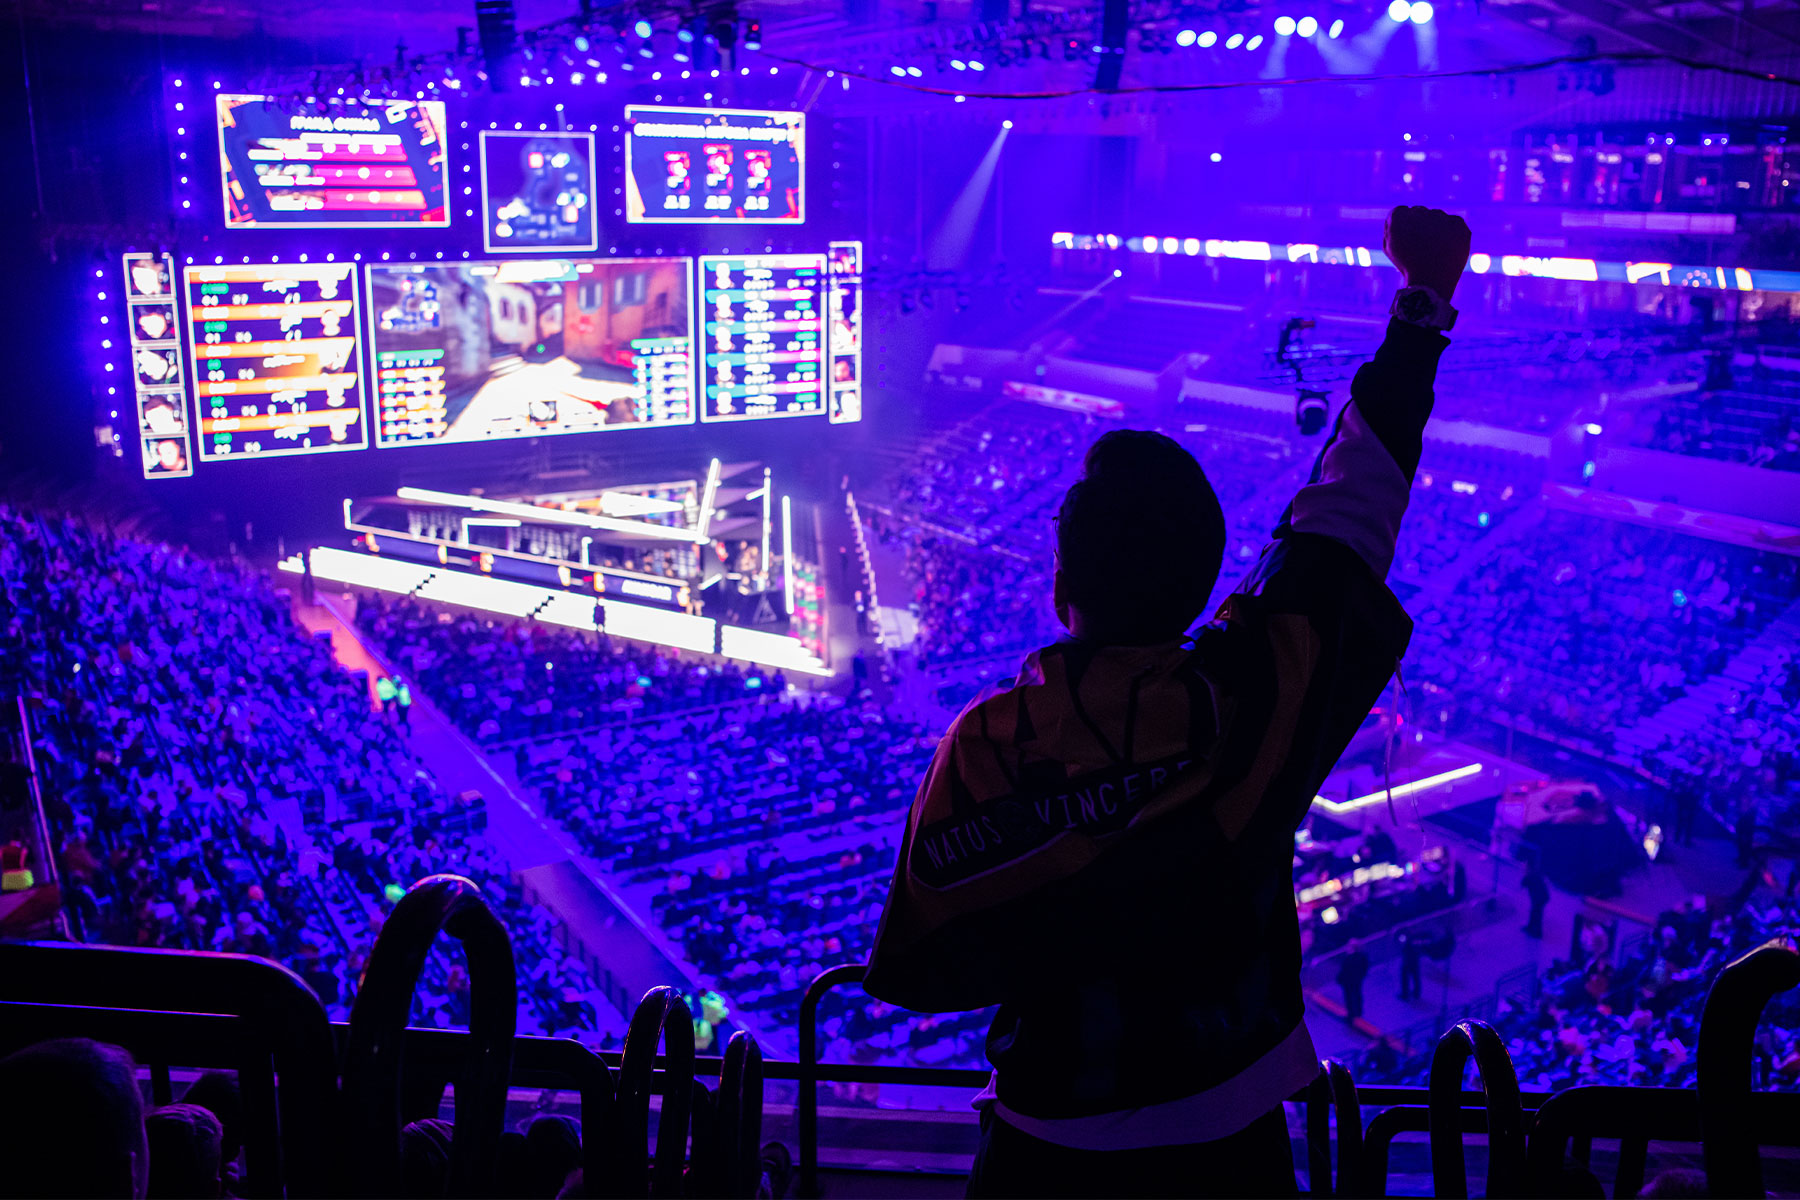 silhouette of man holding fist in air with large esports arena beyond him